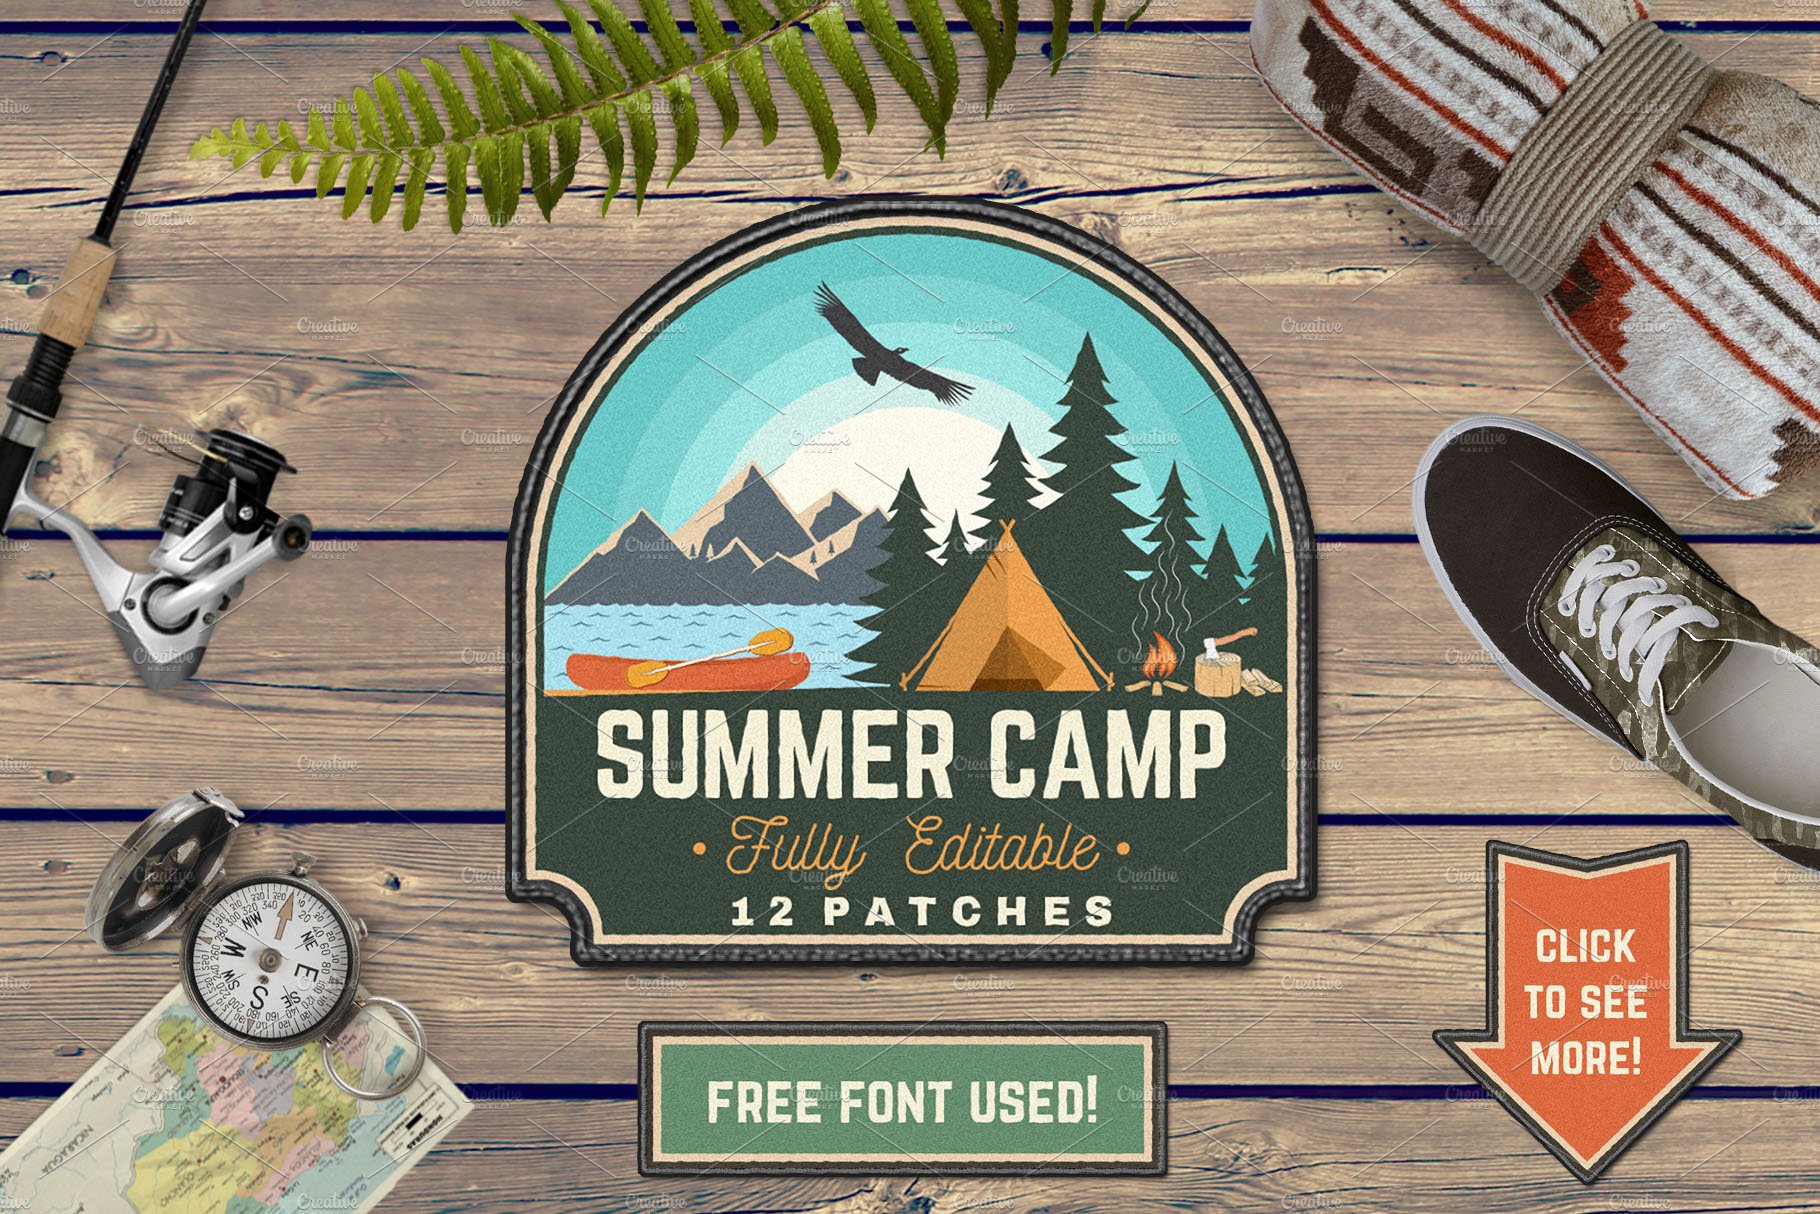 Summer Camp Patches Part 2 cover image.